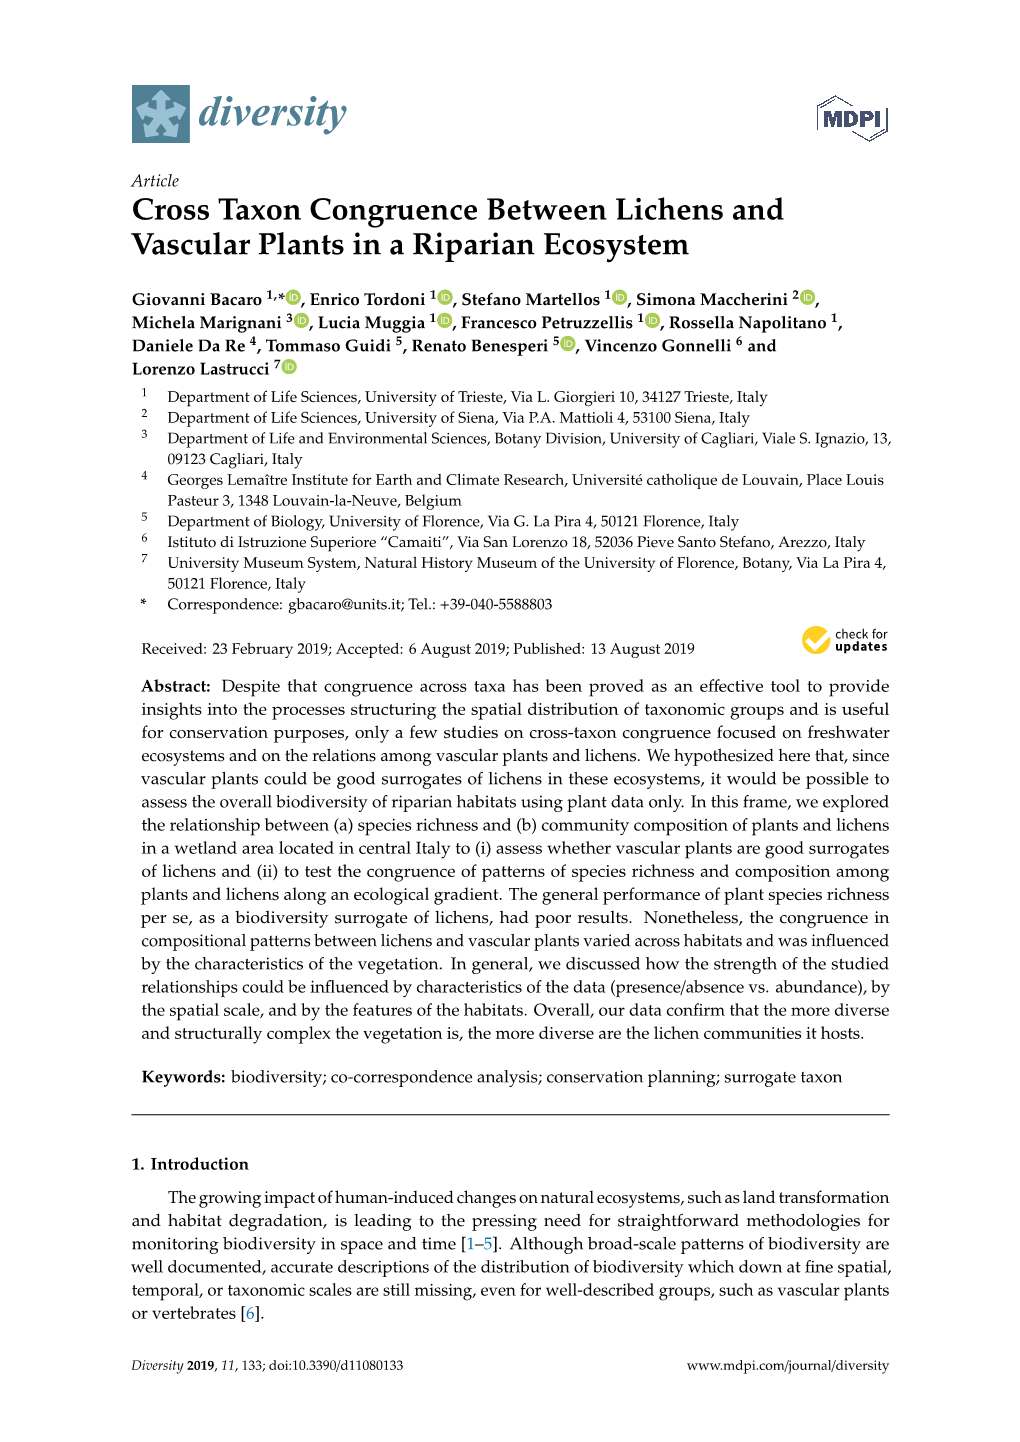 Cross Taxon Congruence Between Lichens and Vascular Plants in a Riparian Ecosystem